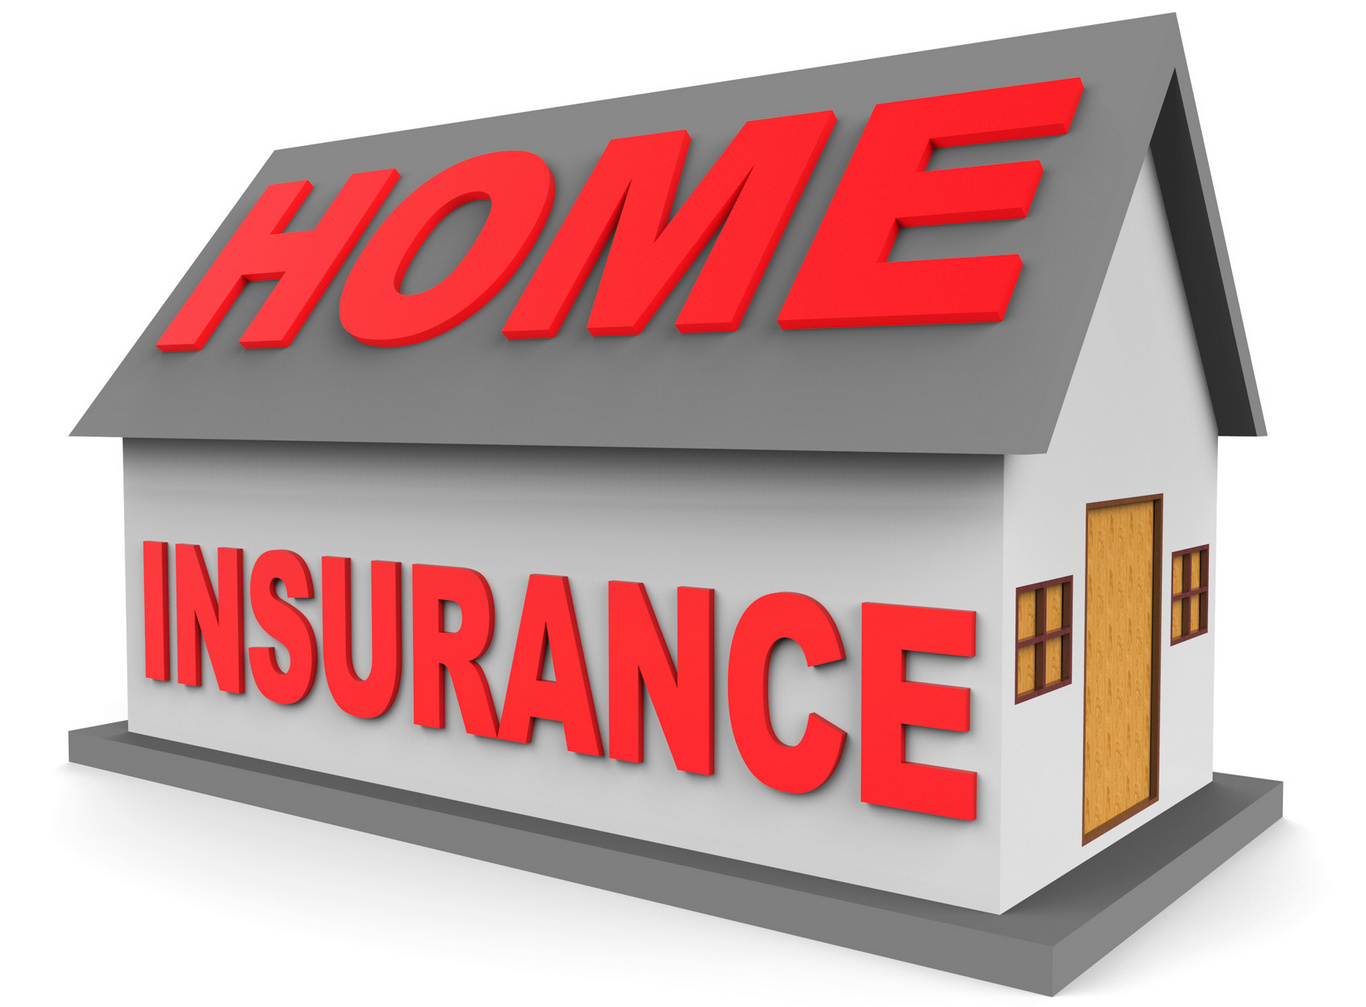 Top Homeowner Insurance Companies in the USA